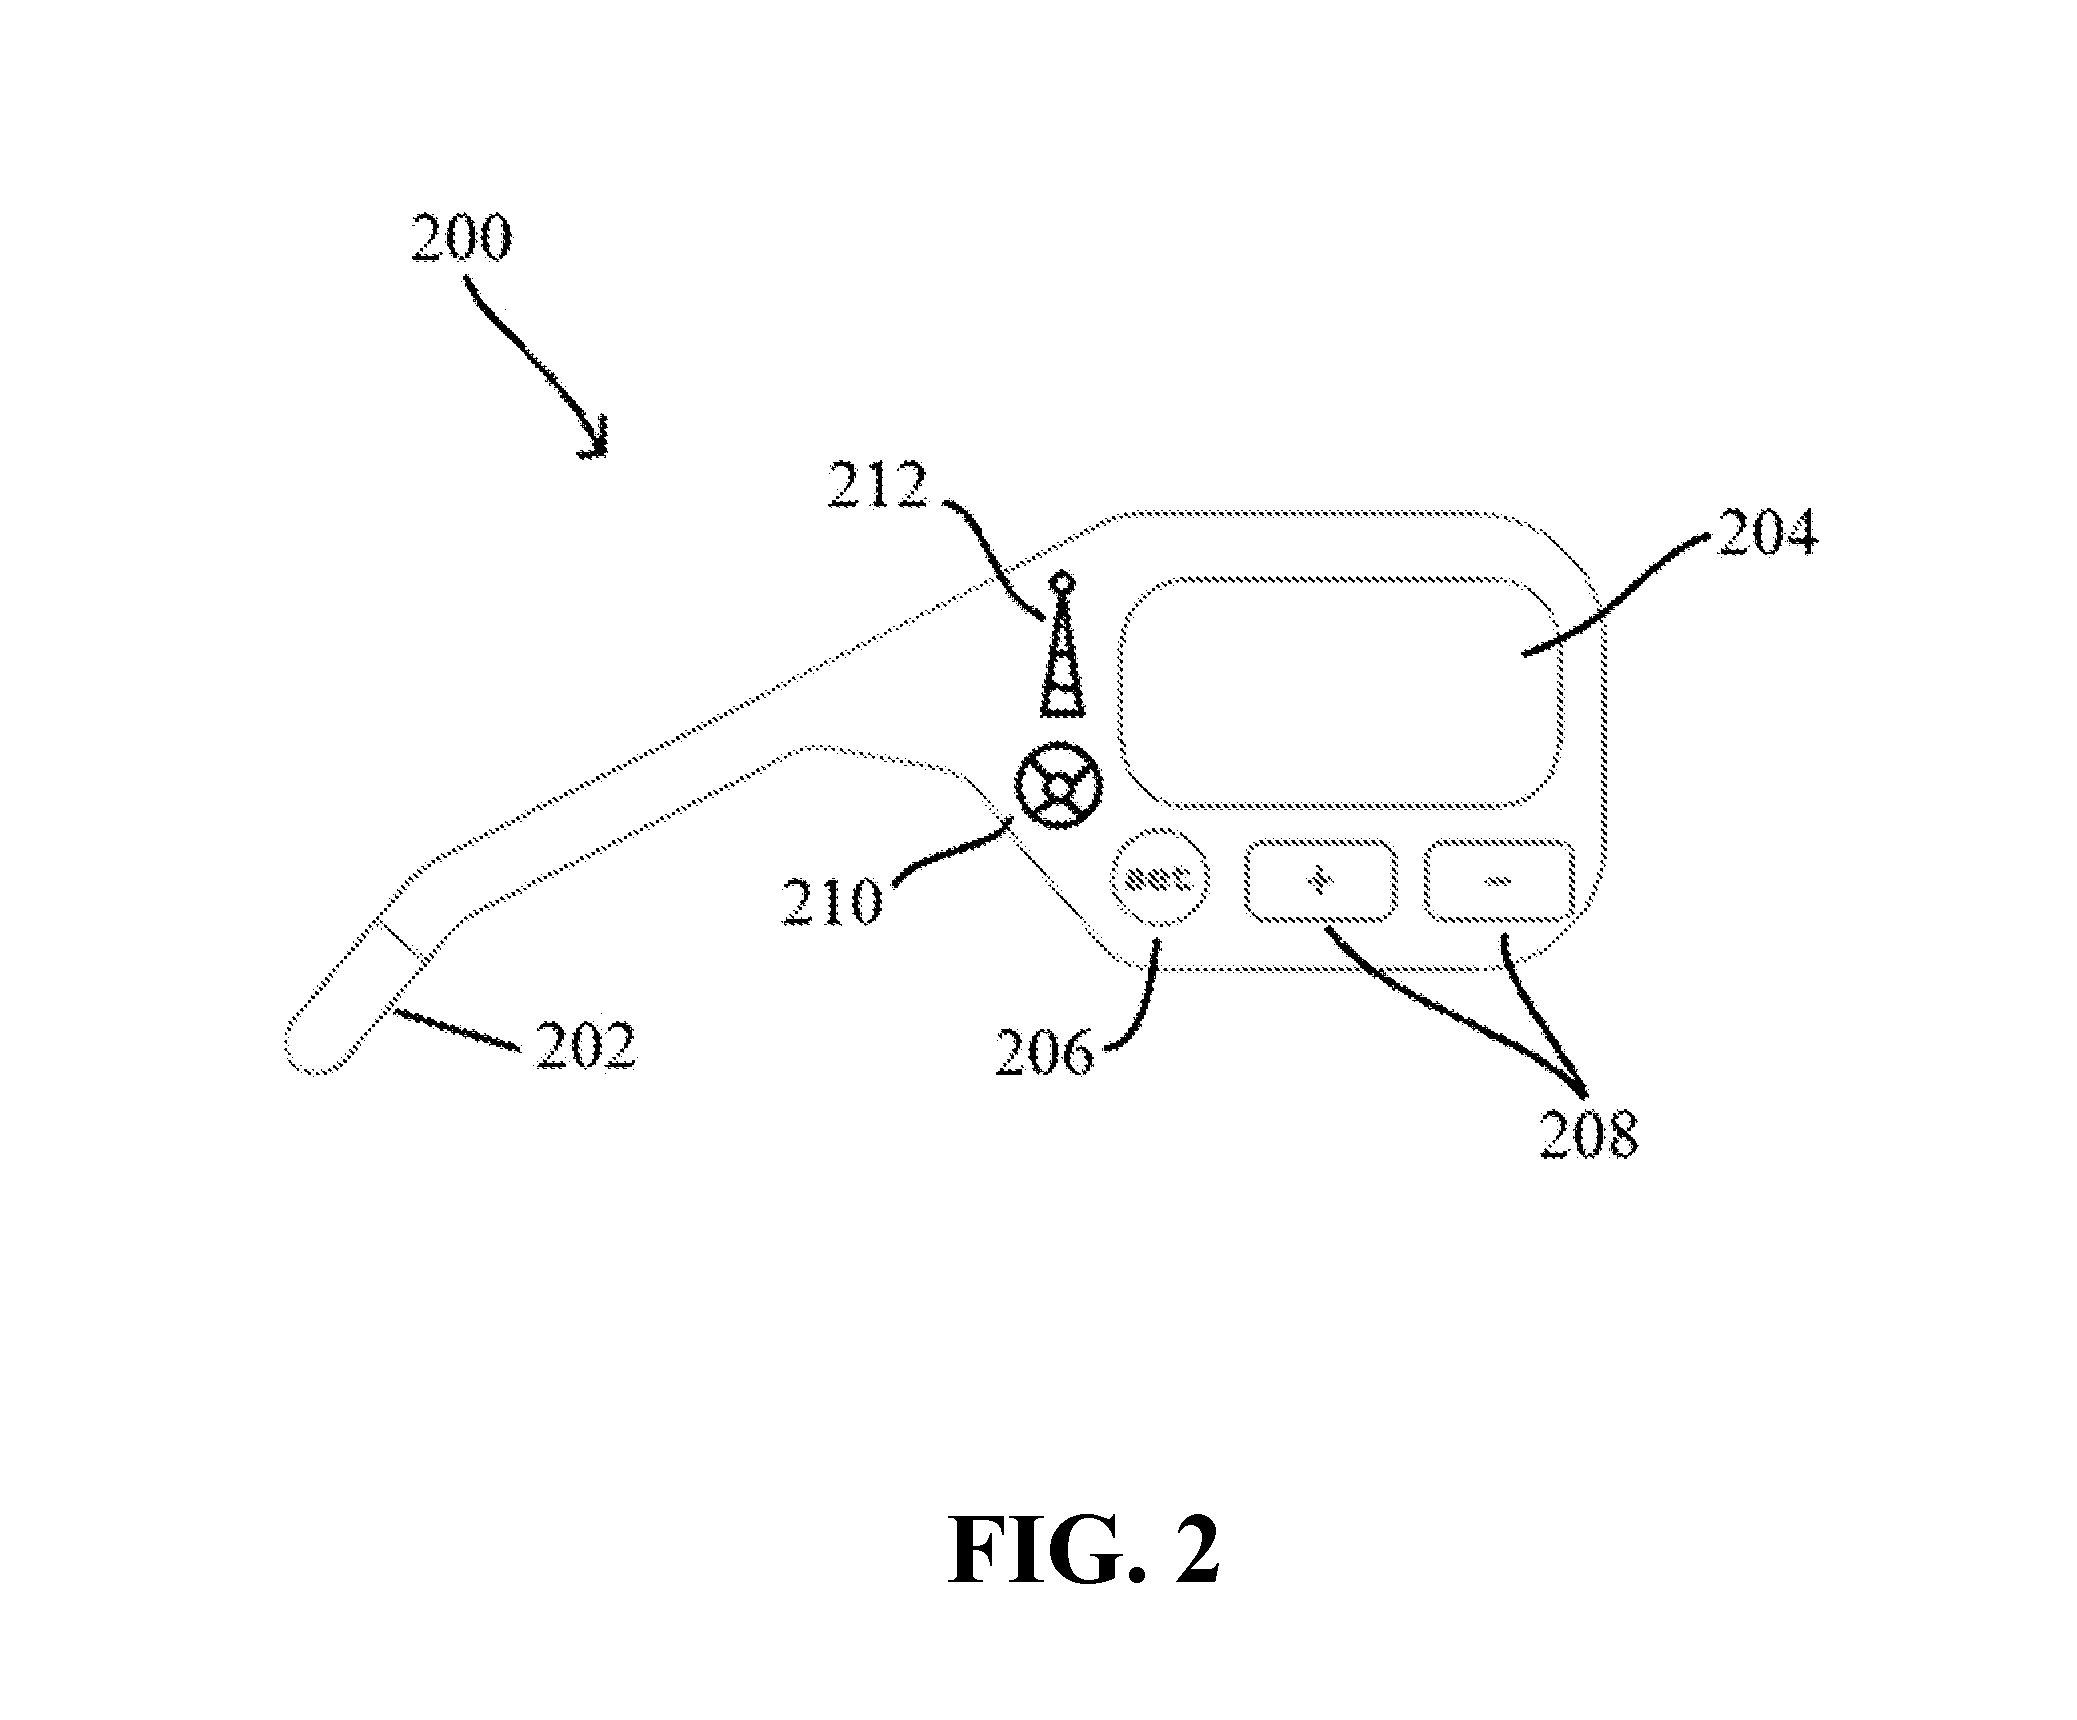 Systems and methods for monitoring fertility using a portable electronic device